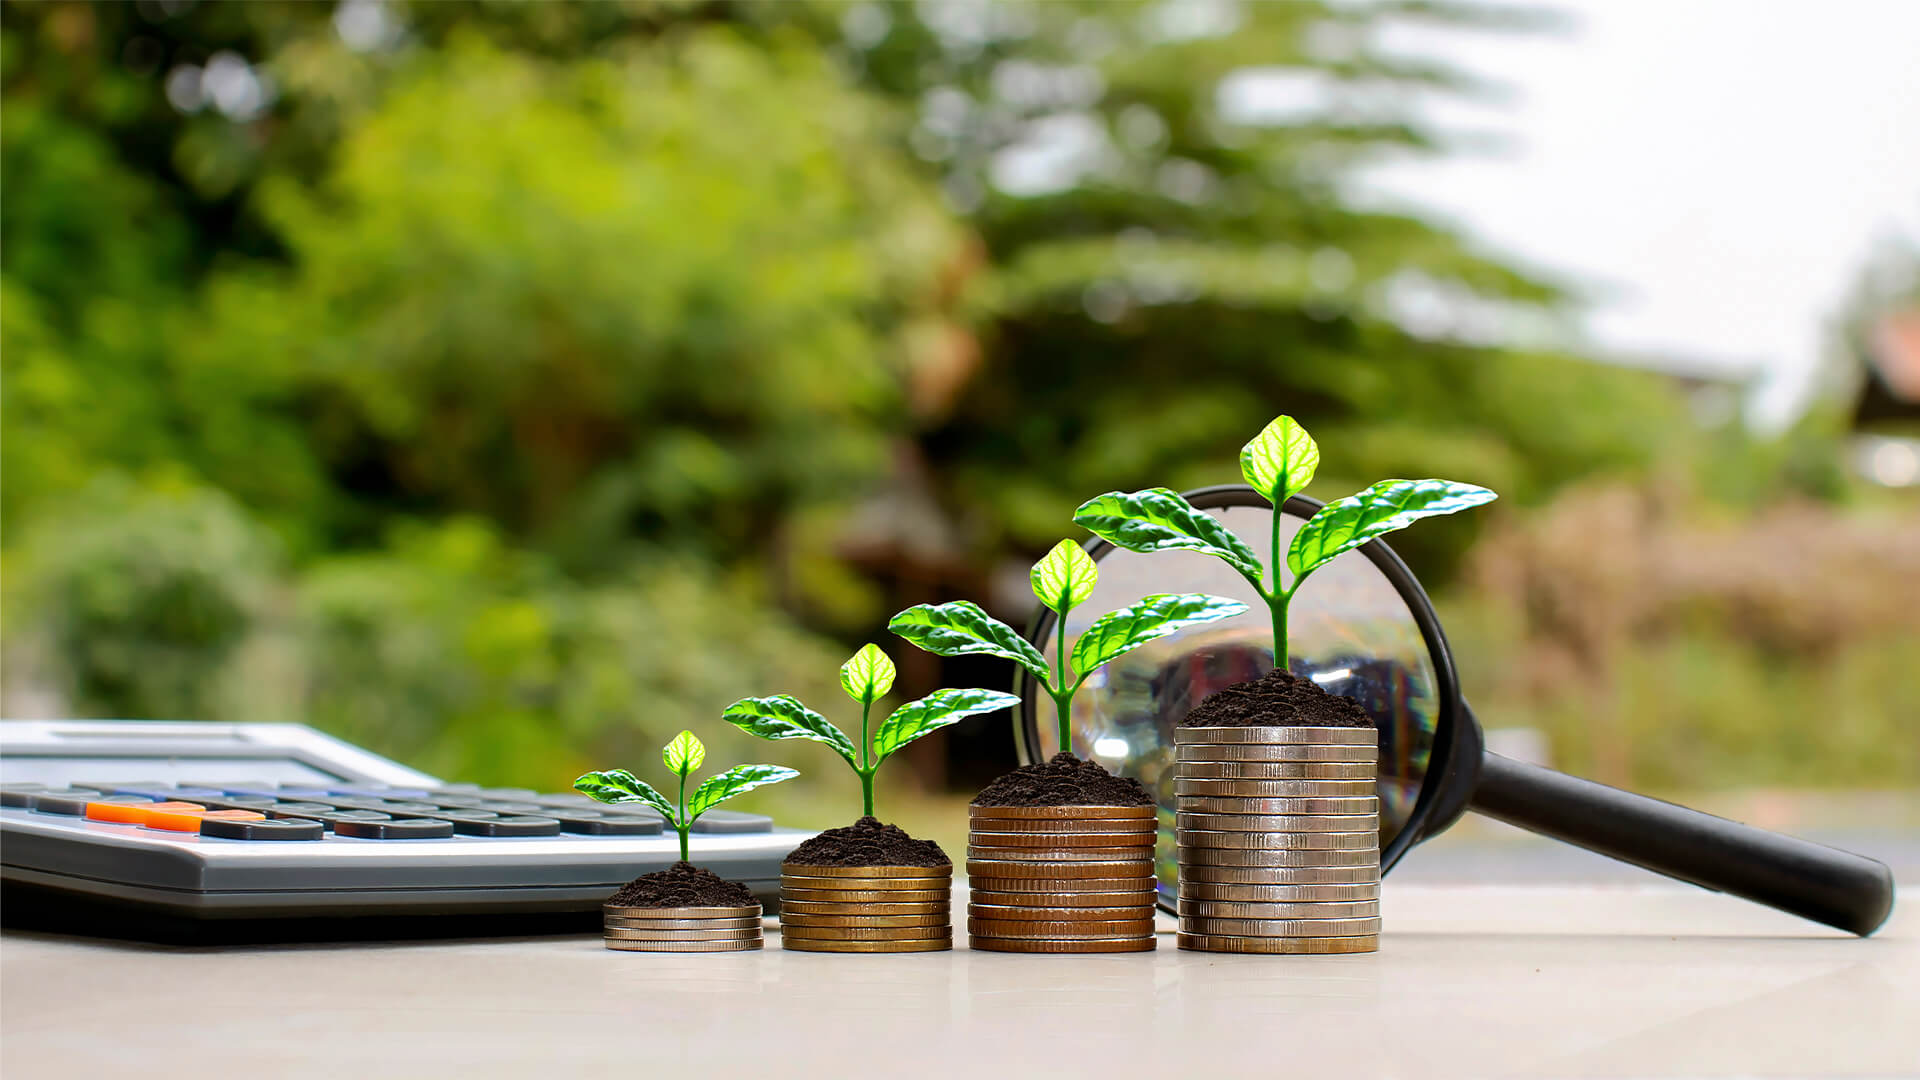 Small tree that grows on a pile of money. Financial investment ideas